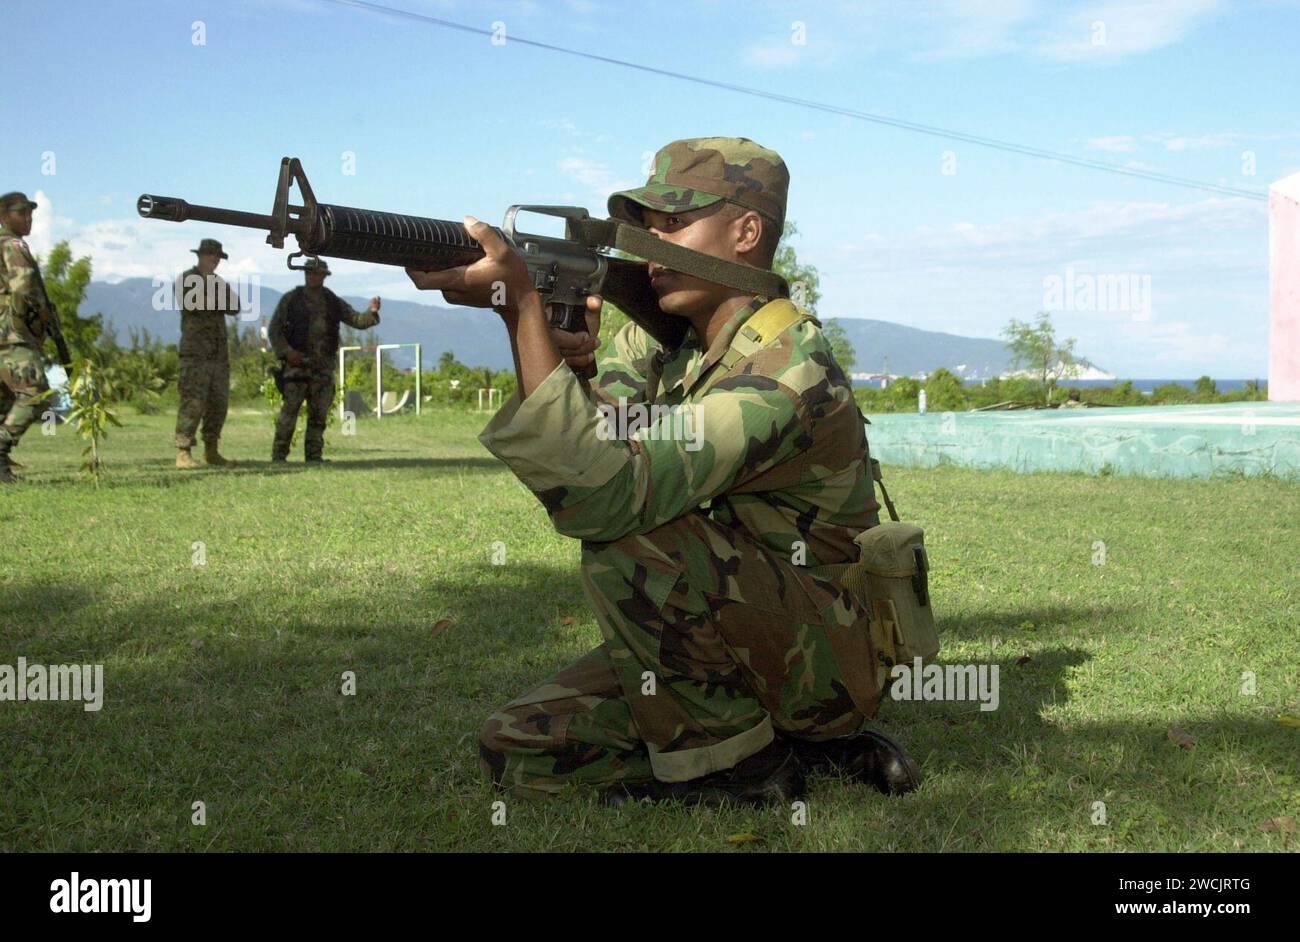 A Dominican Republic Armed Forces Soldier, asigned to Delta Company, 1ST Caribbean Battalion, aims his 5.56 mm M-16 assault rifle in the kneeling prone position on April 18, 2004, at Barahona Army Base, Dominican Republic DA-SD-07-32444. Stock Photo